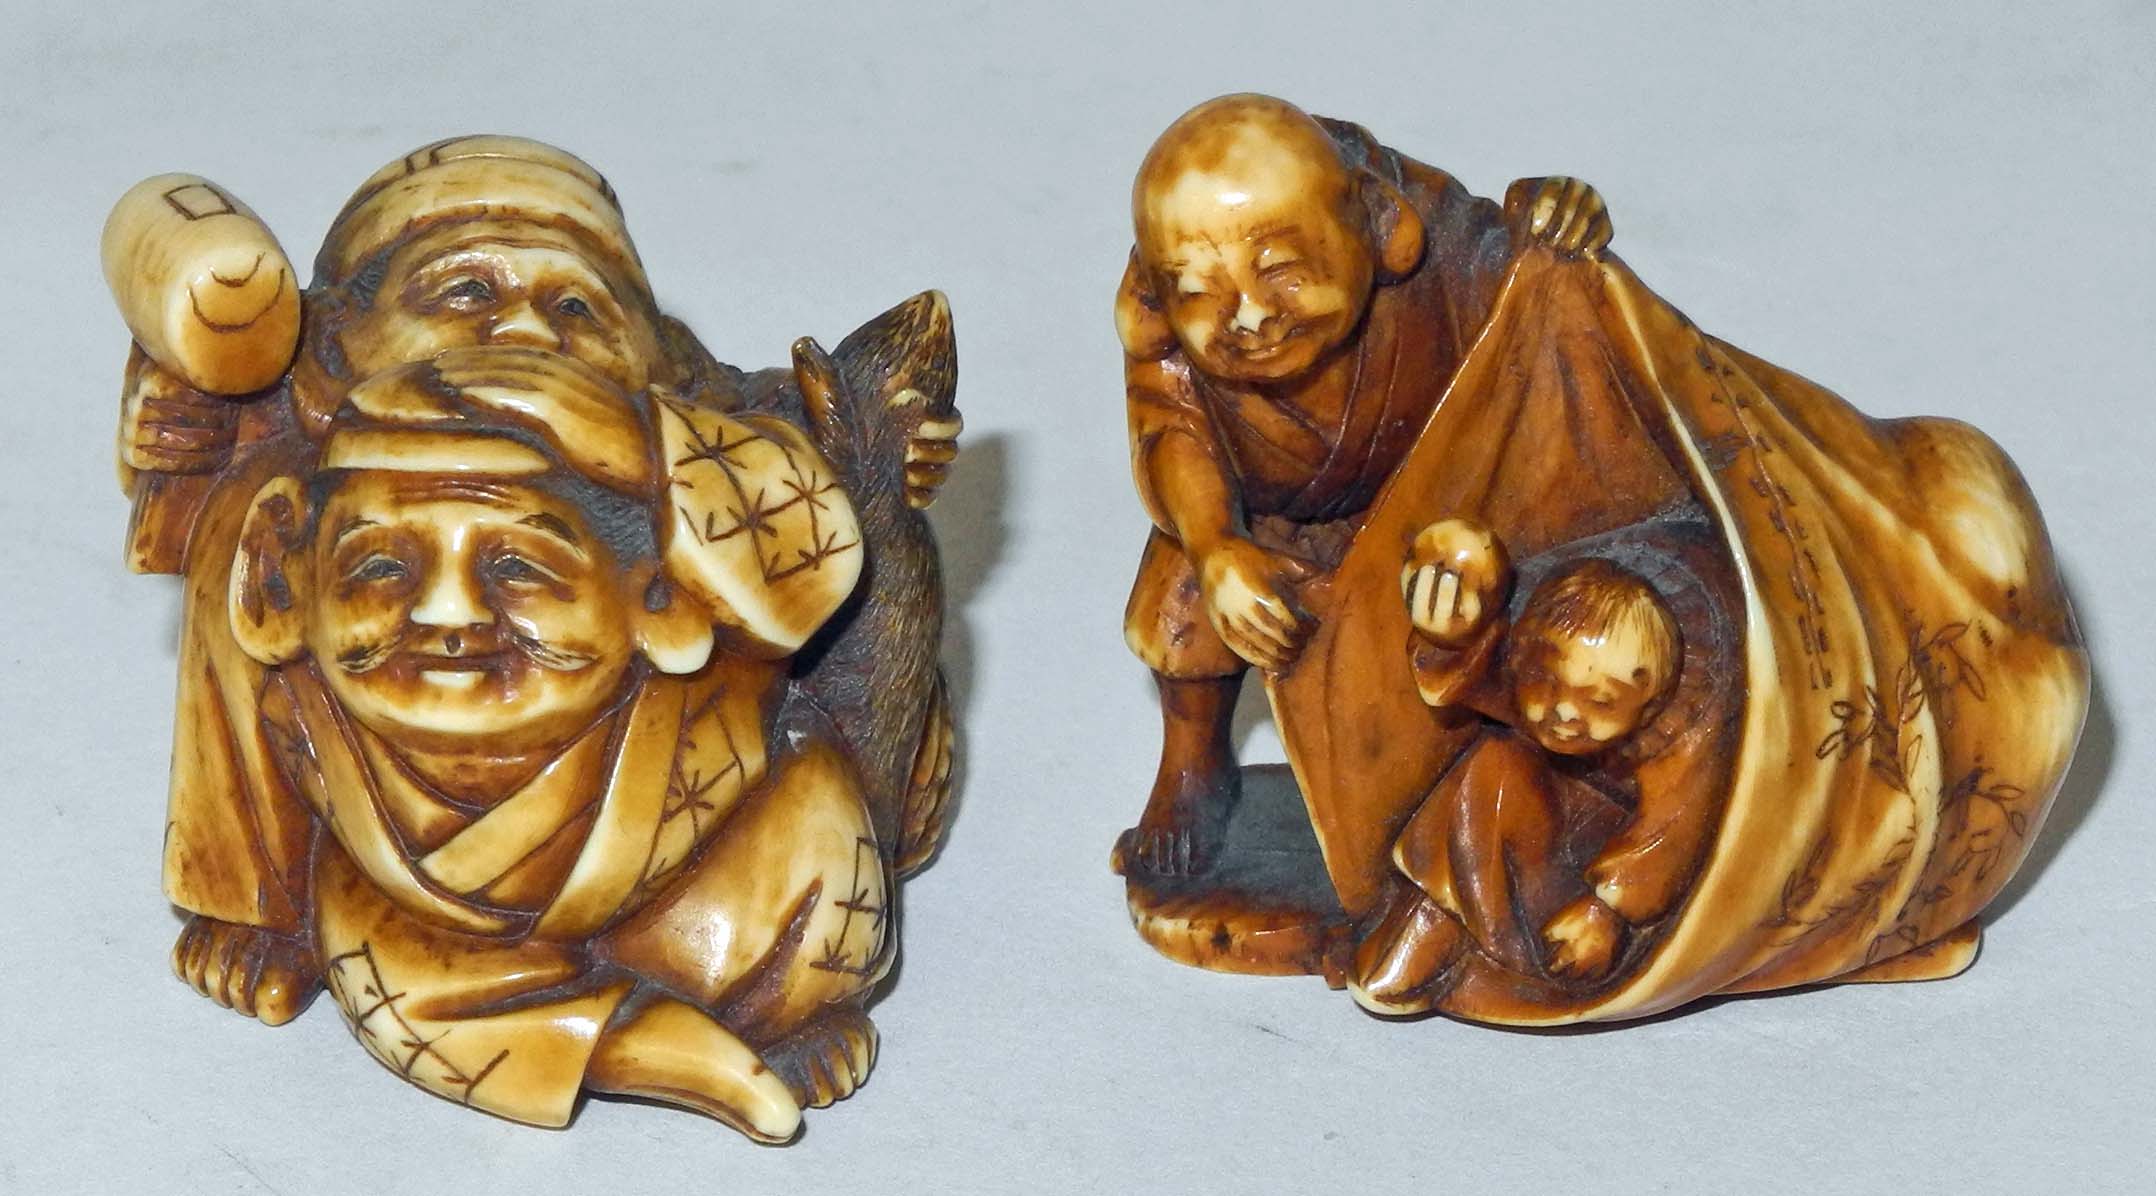 A Japanese ivory netsuke of a man opening a bag revealing a child playing inside, together with